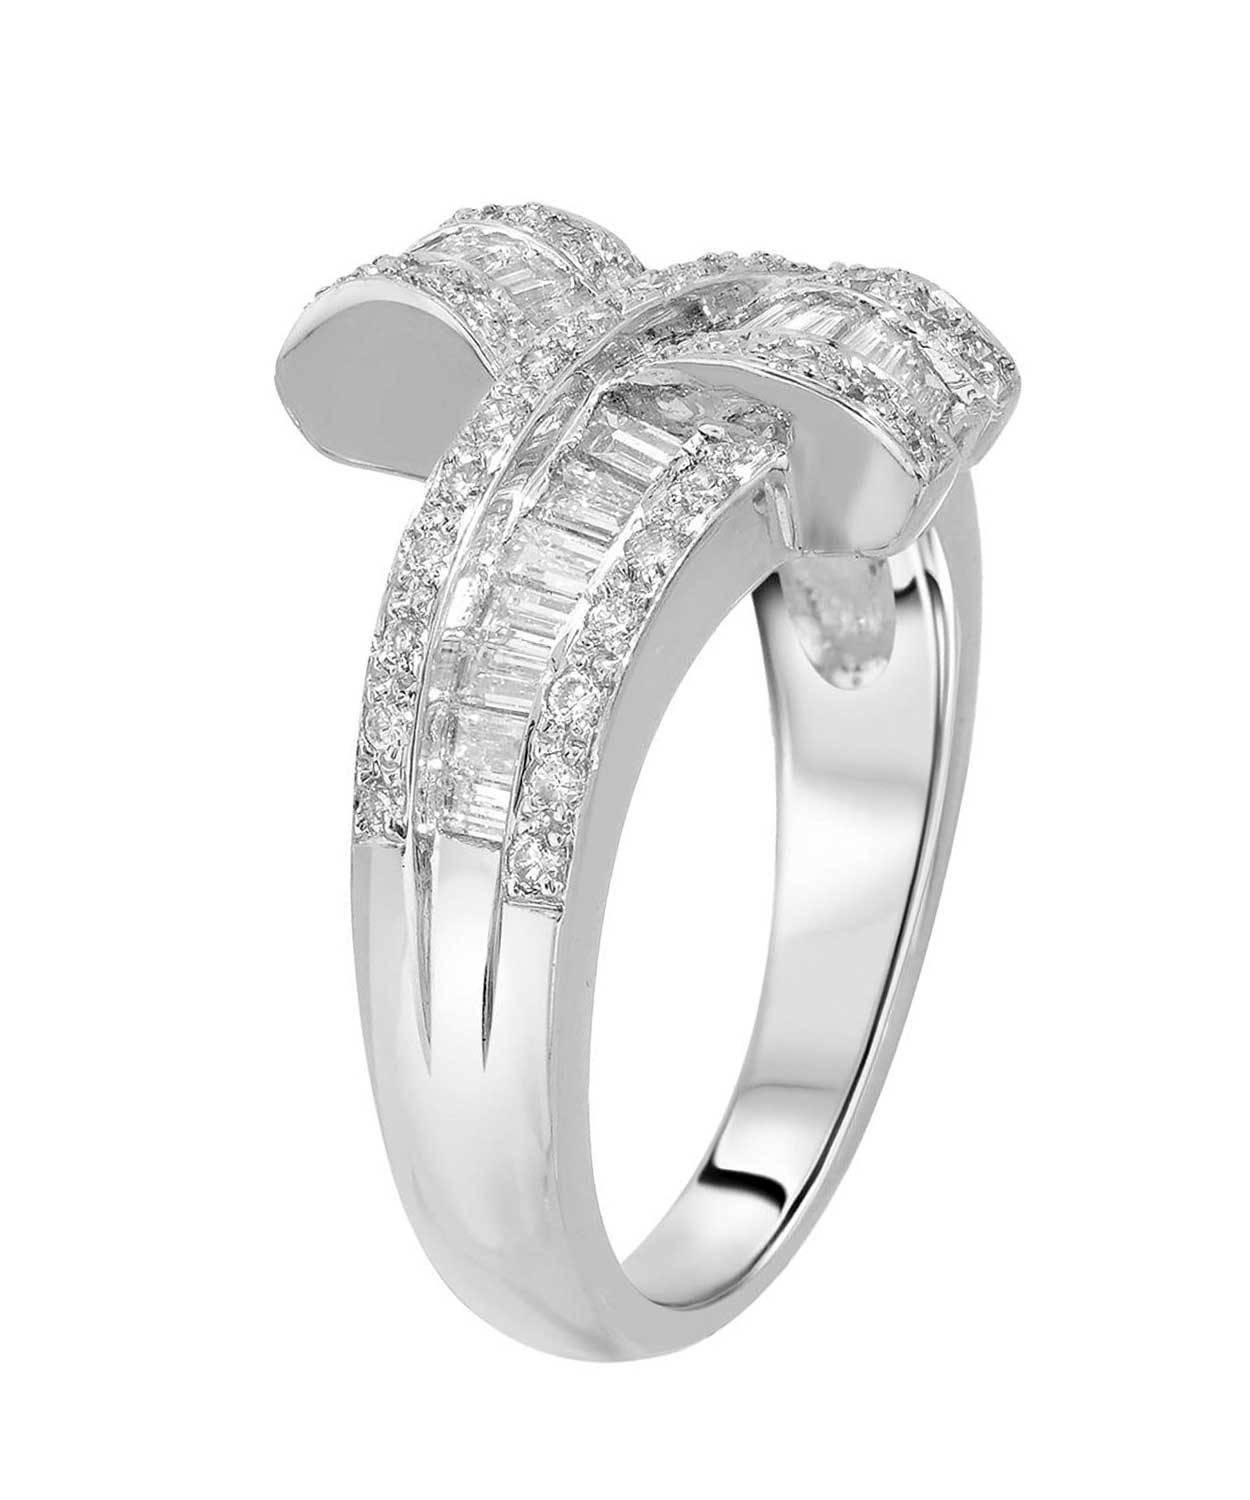 Signature Collection 1.00 ctw Diamond 18k White Gold Right Hand Ring View 2